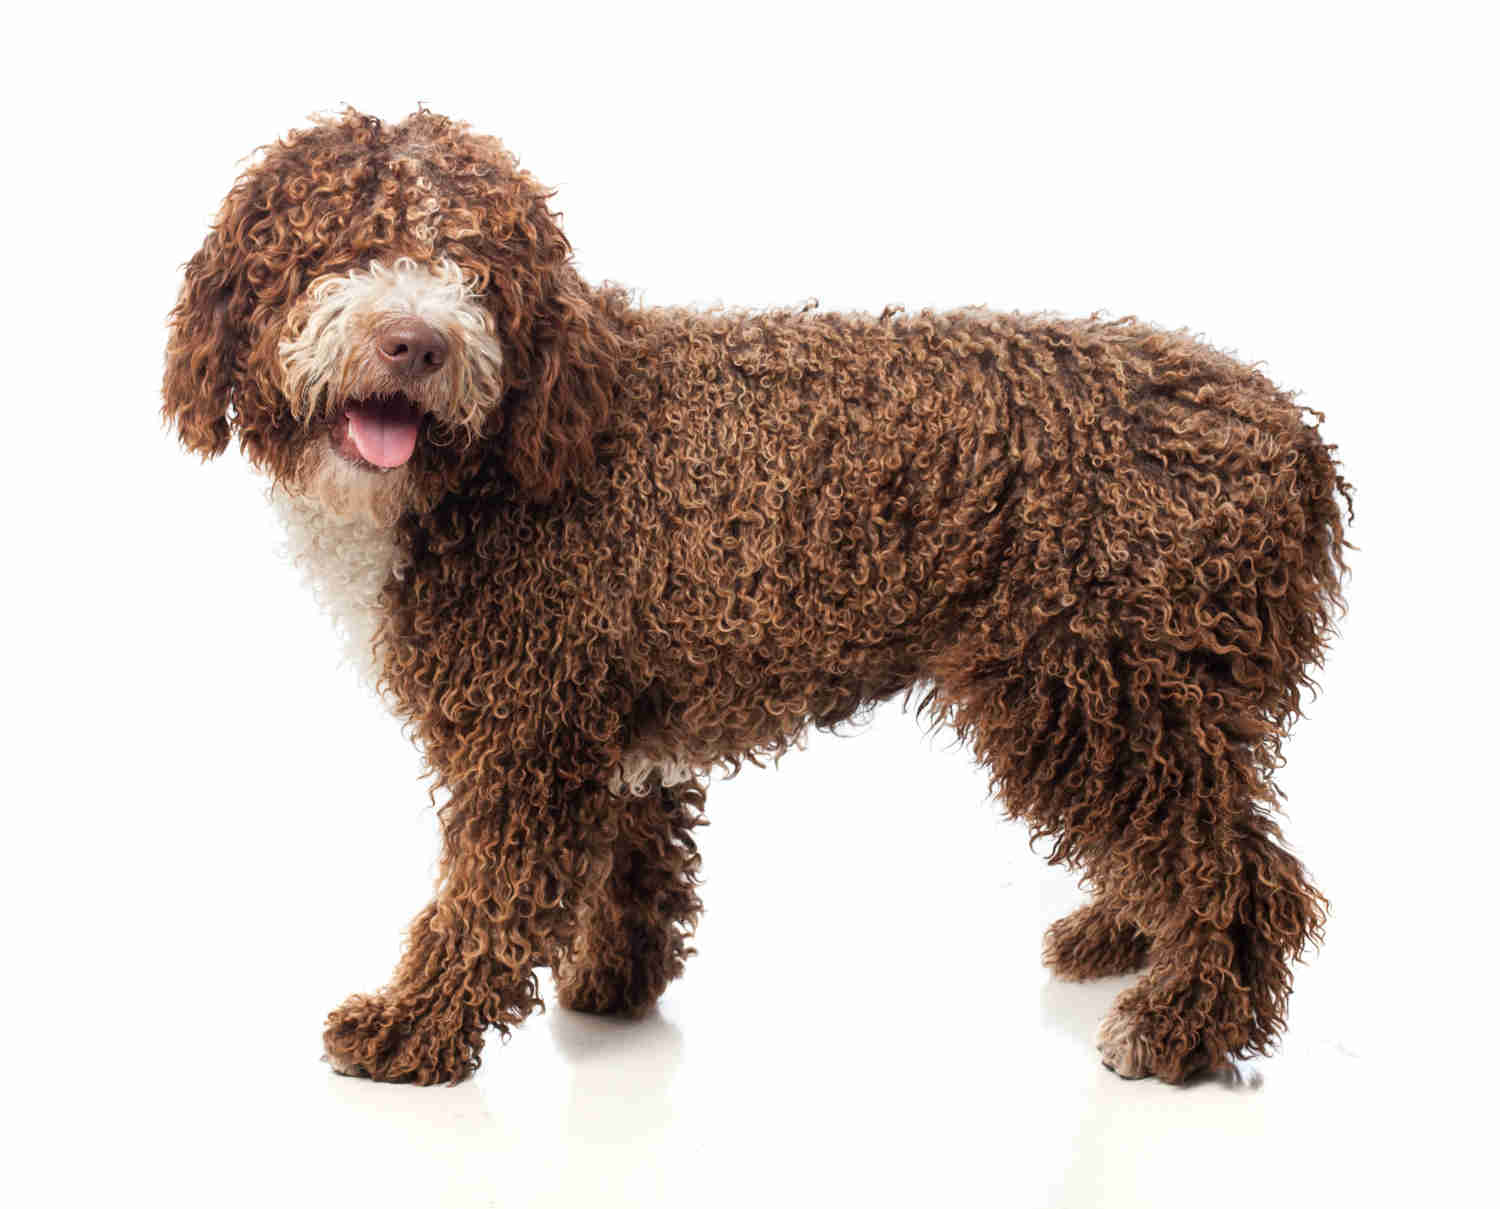 5 Effective Ways to Help Your Goldendoodle Overcome Fear of Fireworks